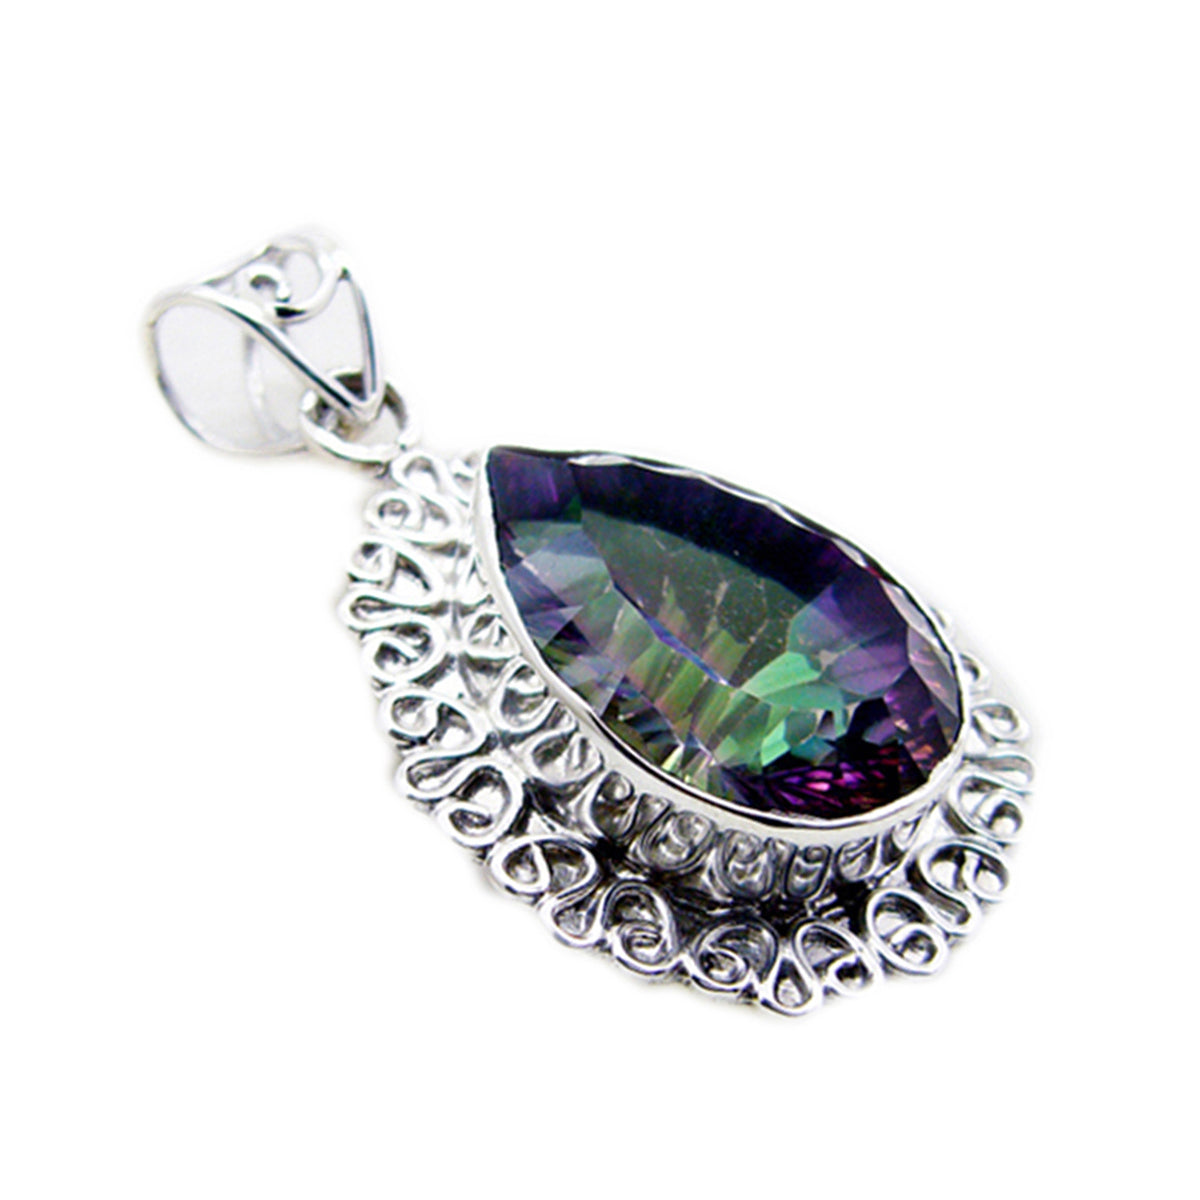 Riyo Smashing Gems Pear Faceted Multi Color Mystic Quartz Silver Pendant Gift For Boxing Day